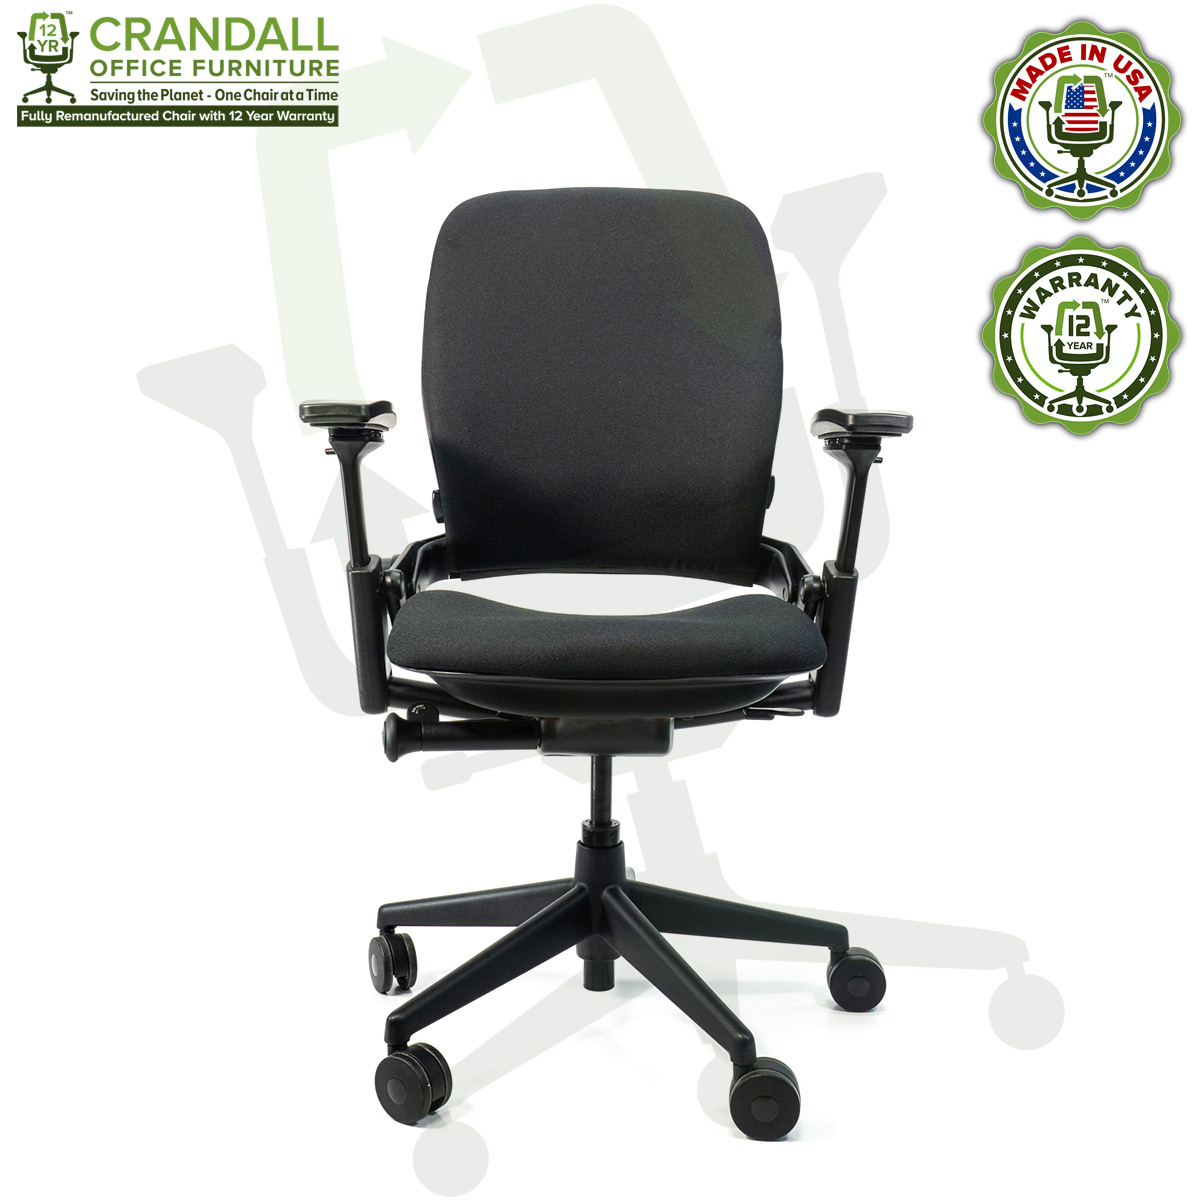 Big and Tall Office Chair 400lbs Heavy Duty Computer Chair, Wide Seat Desk  Chair Ergonomic Mesh Chair, 4D Armrest Metal Base Thick Padded Seat